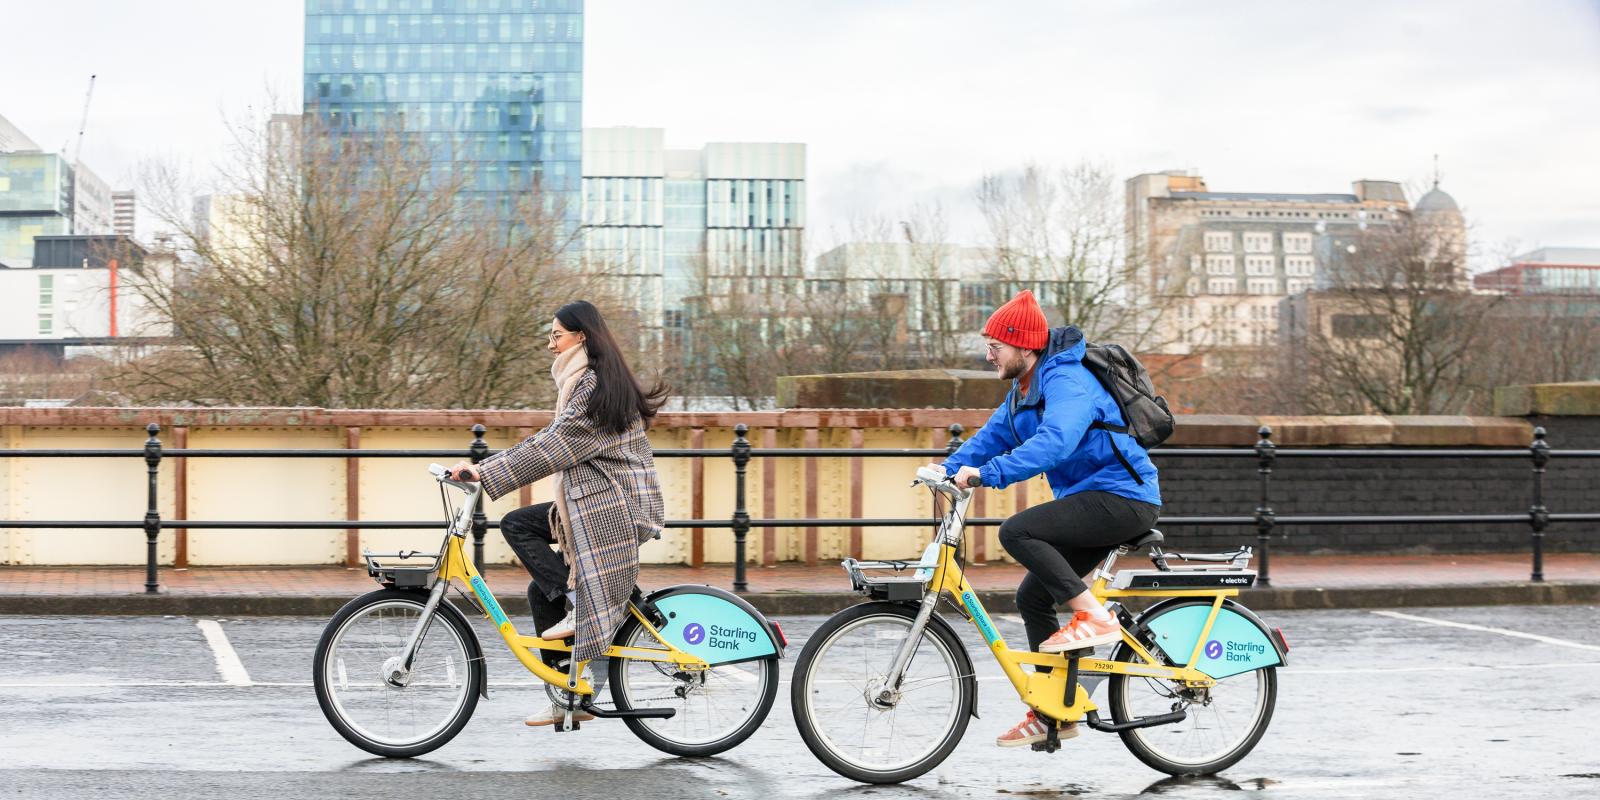 Starling Bank Bikes in Greater Manchester